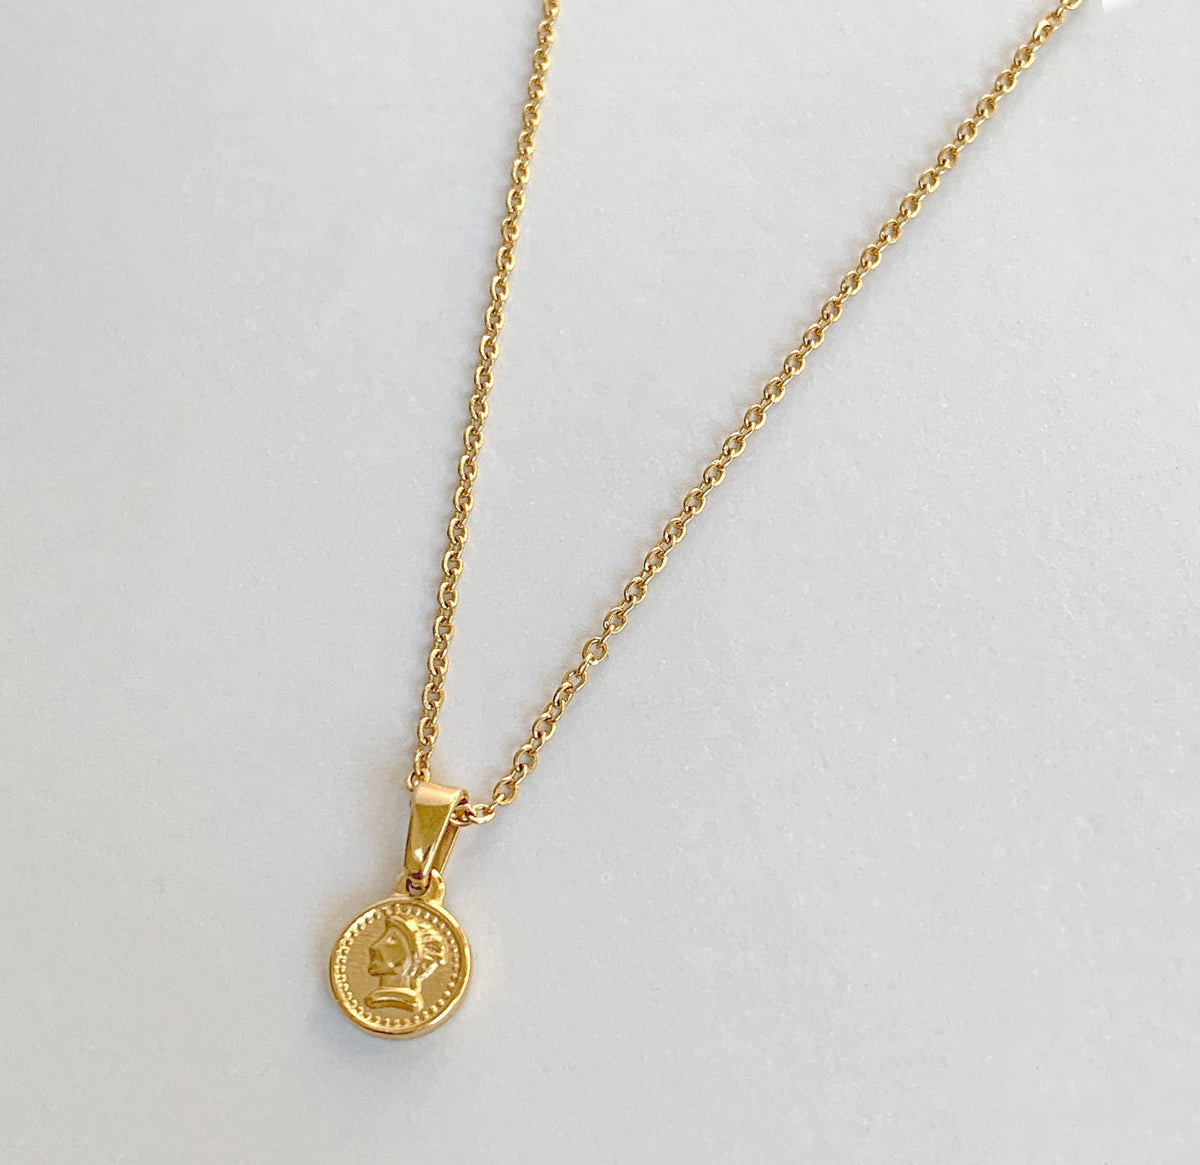 DAINTY GOLD COIN NECKLACE - SAMPLE